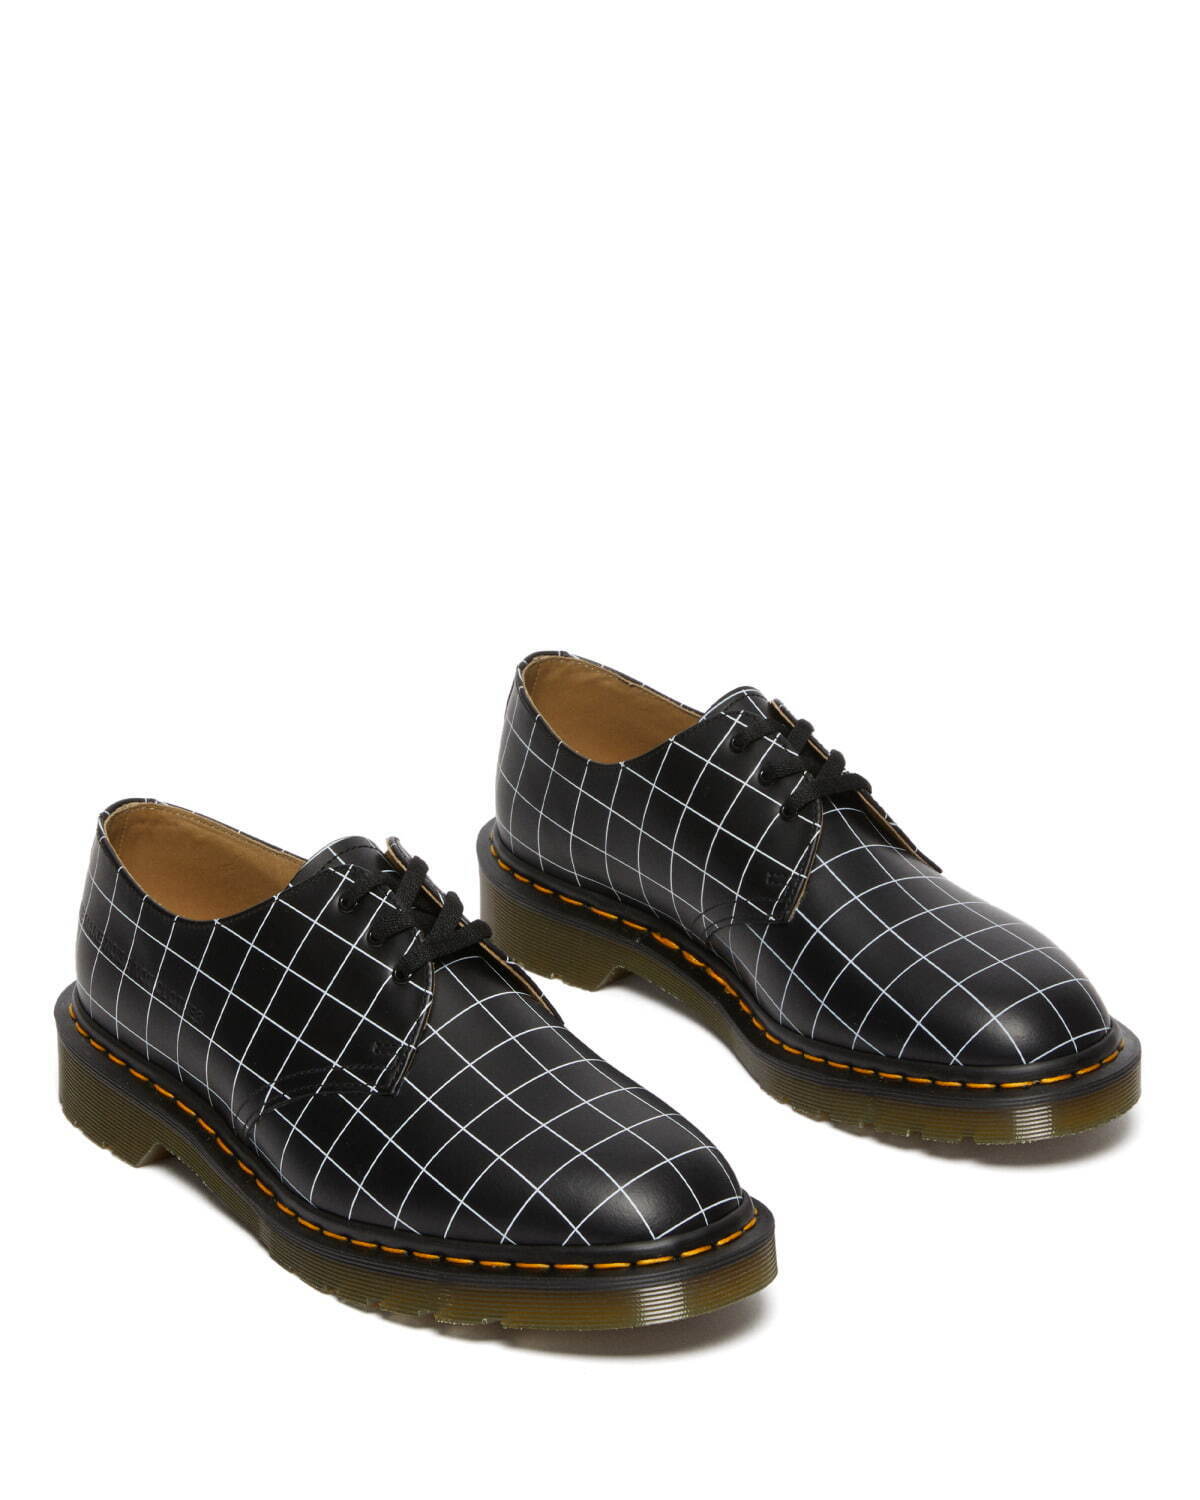 1461 UNDERCOVER(Black Check Smooth) 47,300円